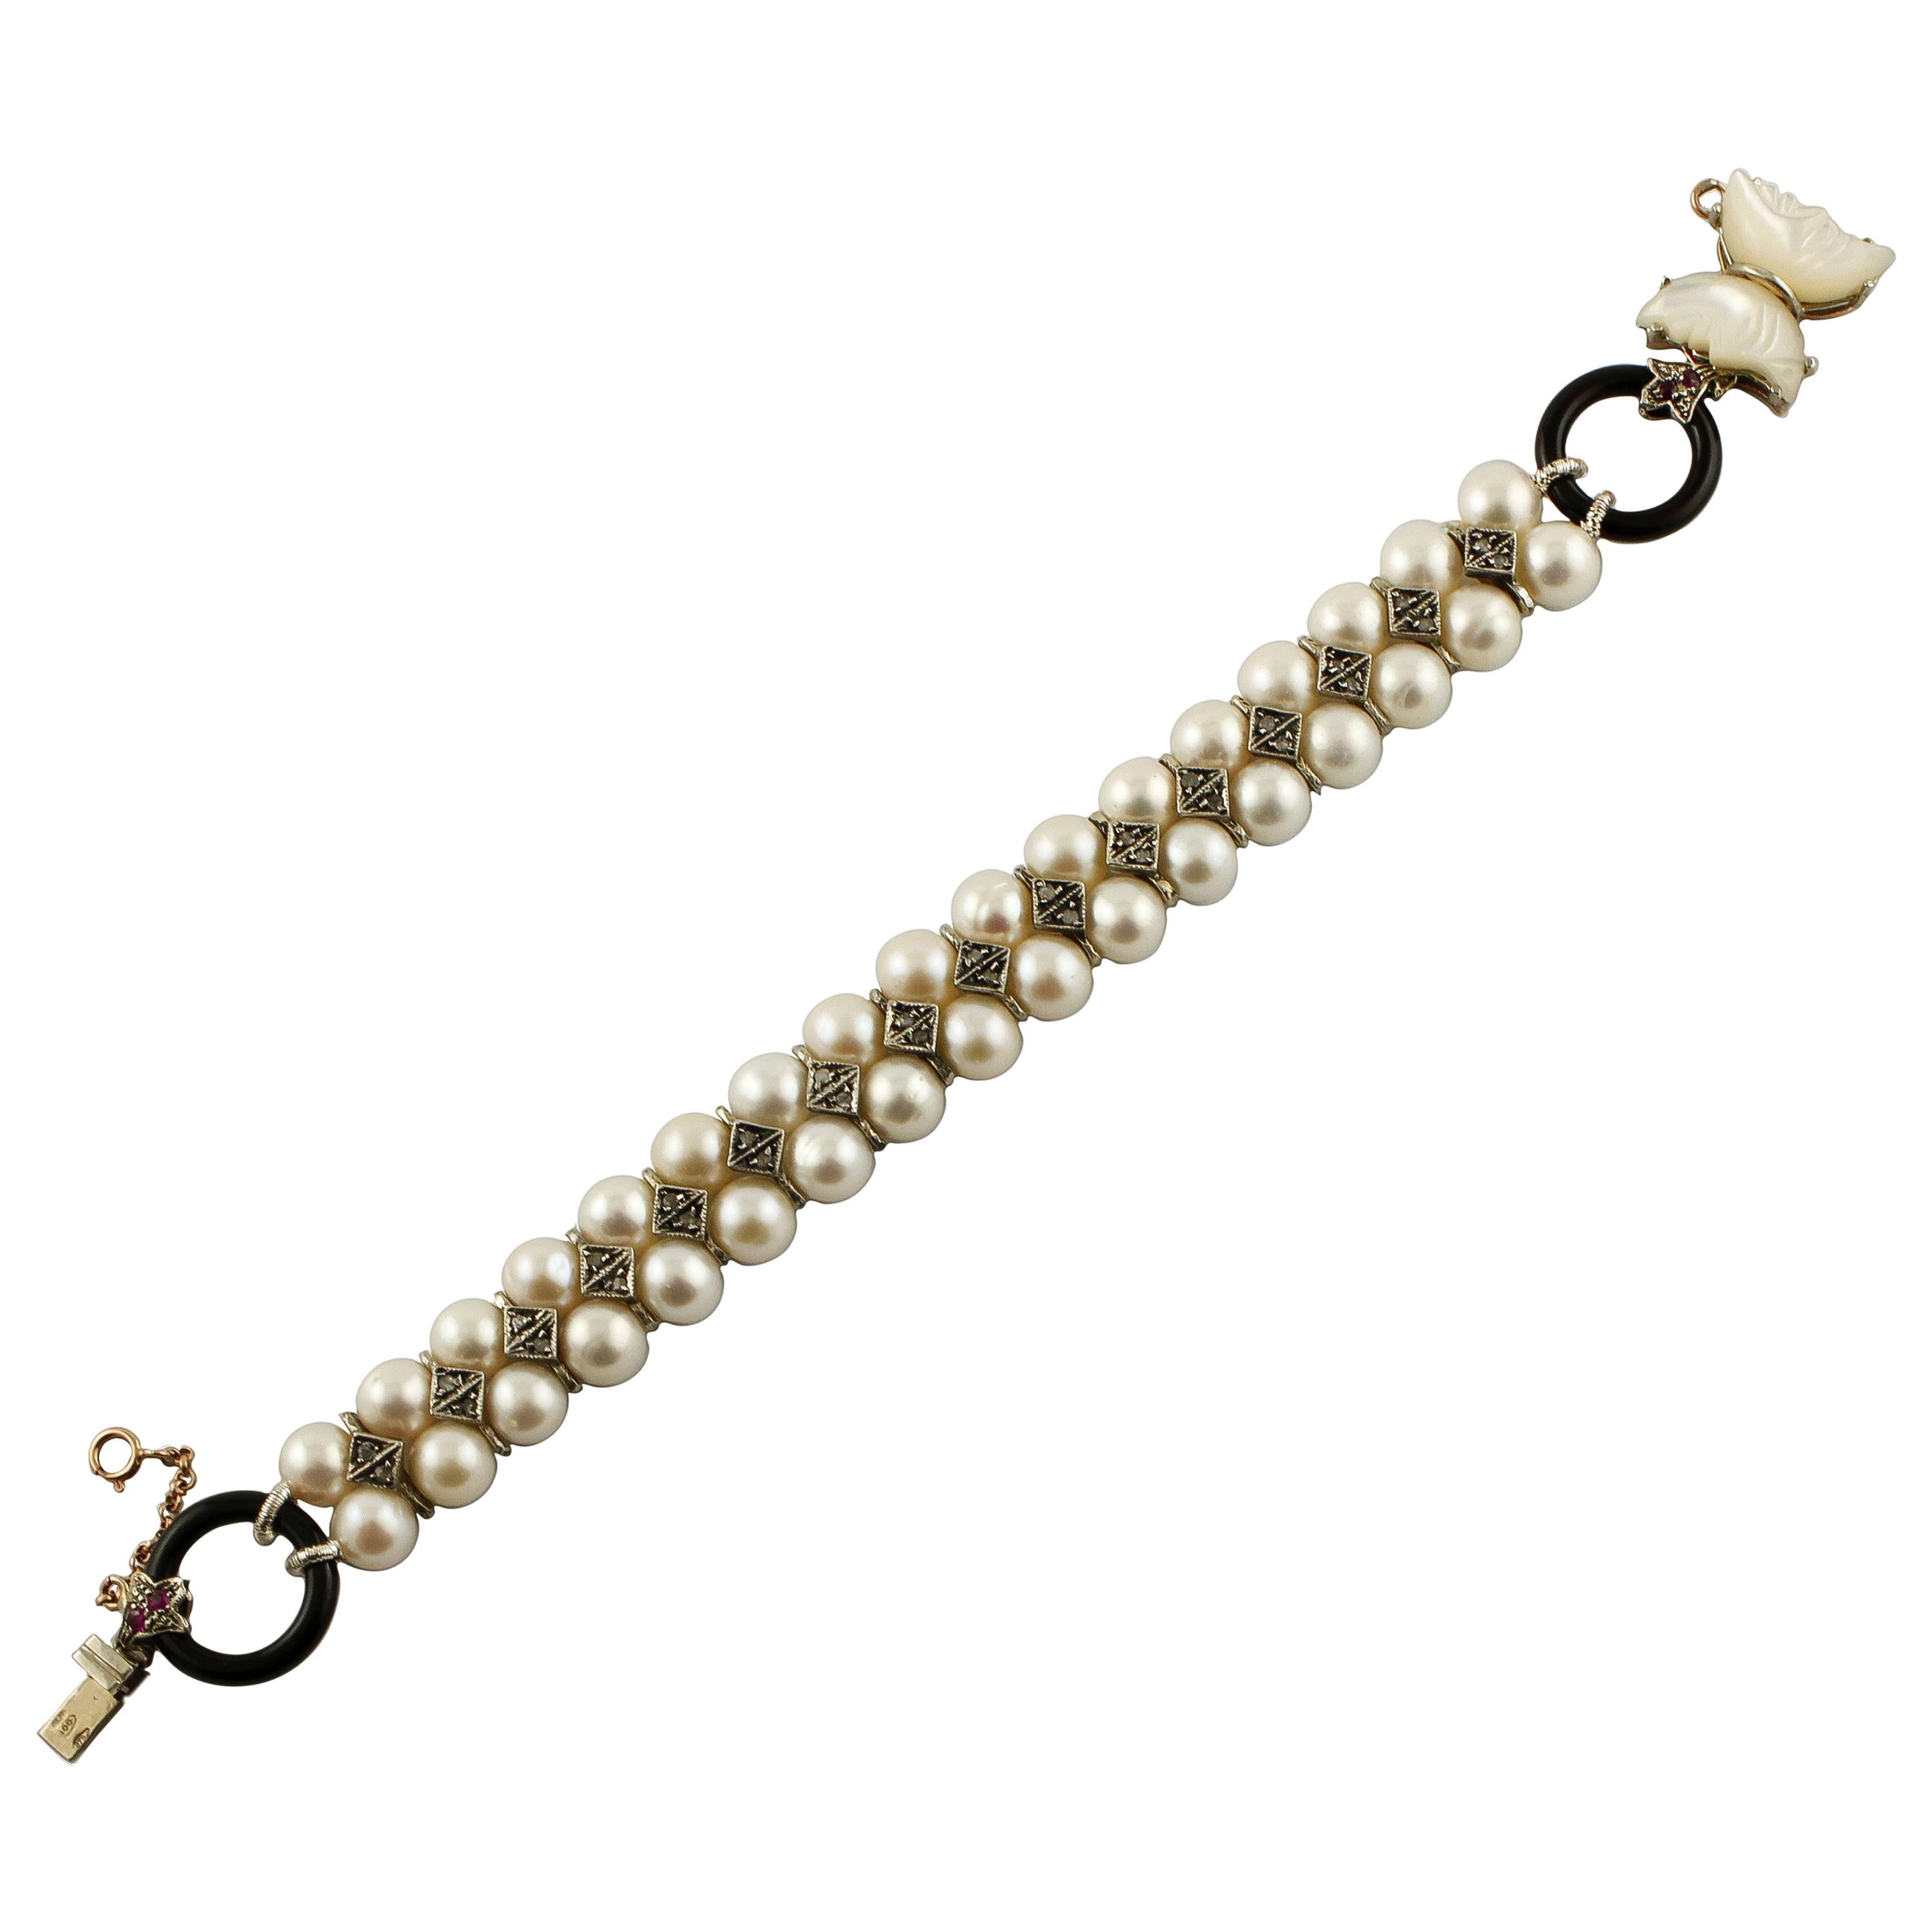 Pearls, Diamonds, Onyx, Mother-of-Pearl Rose Gold and Silver Beaded Bracelet